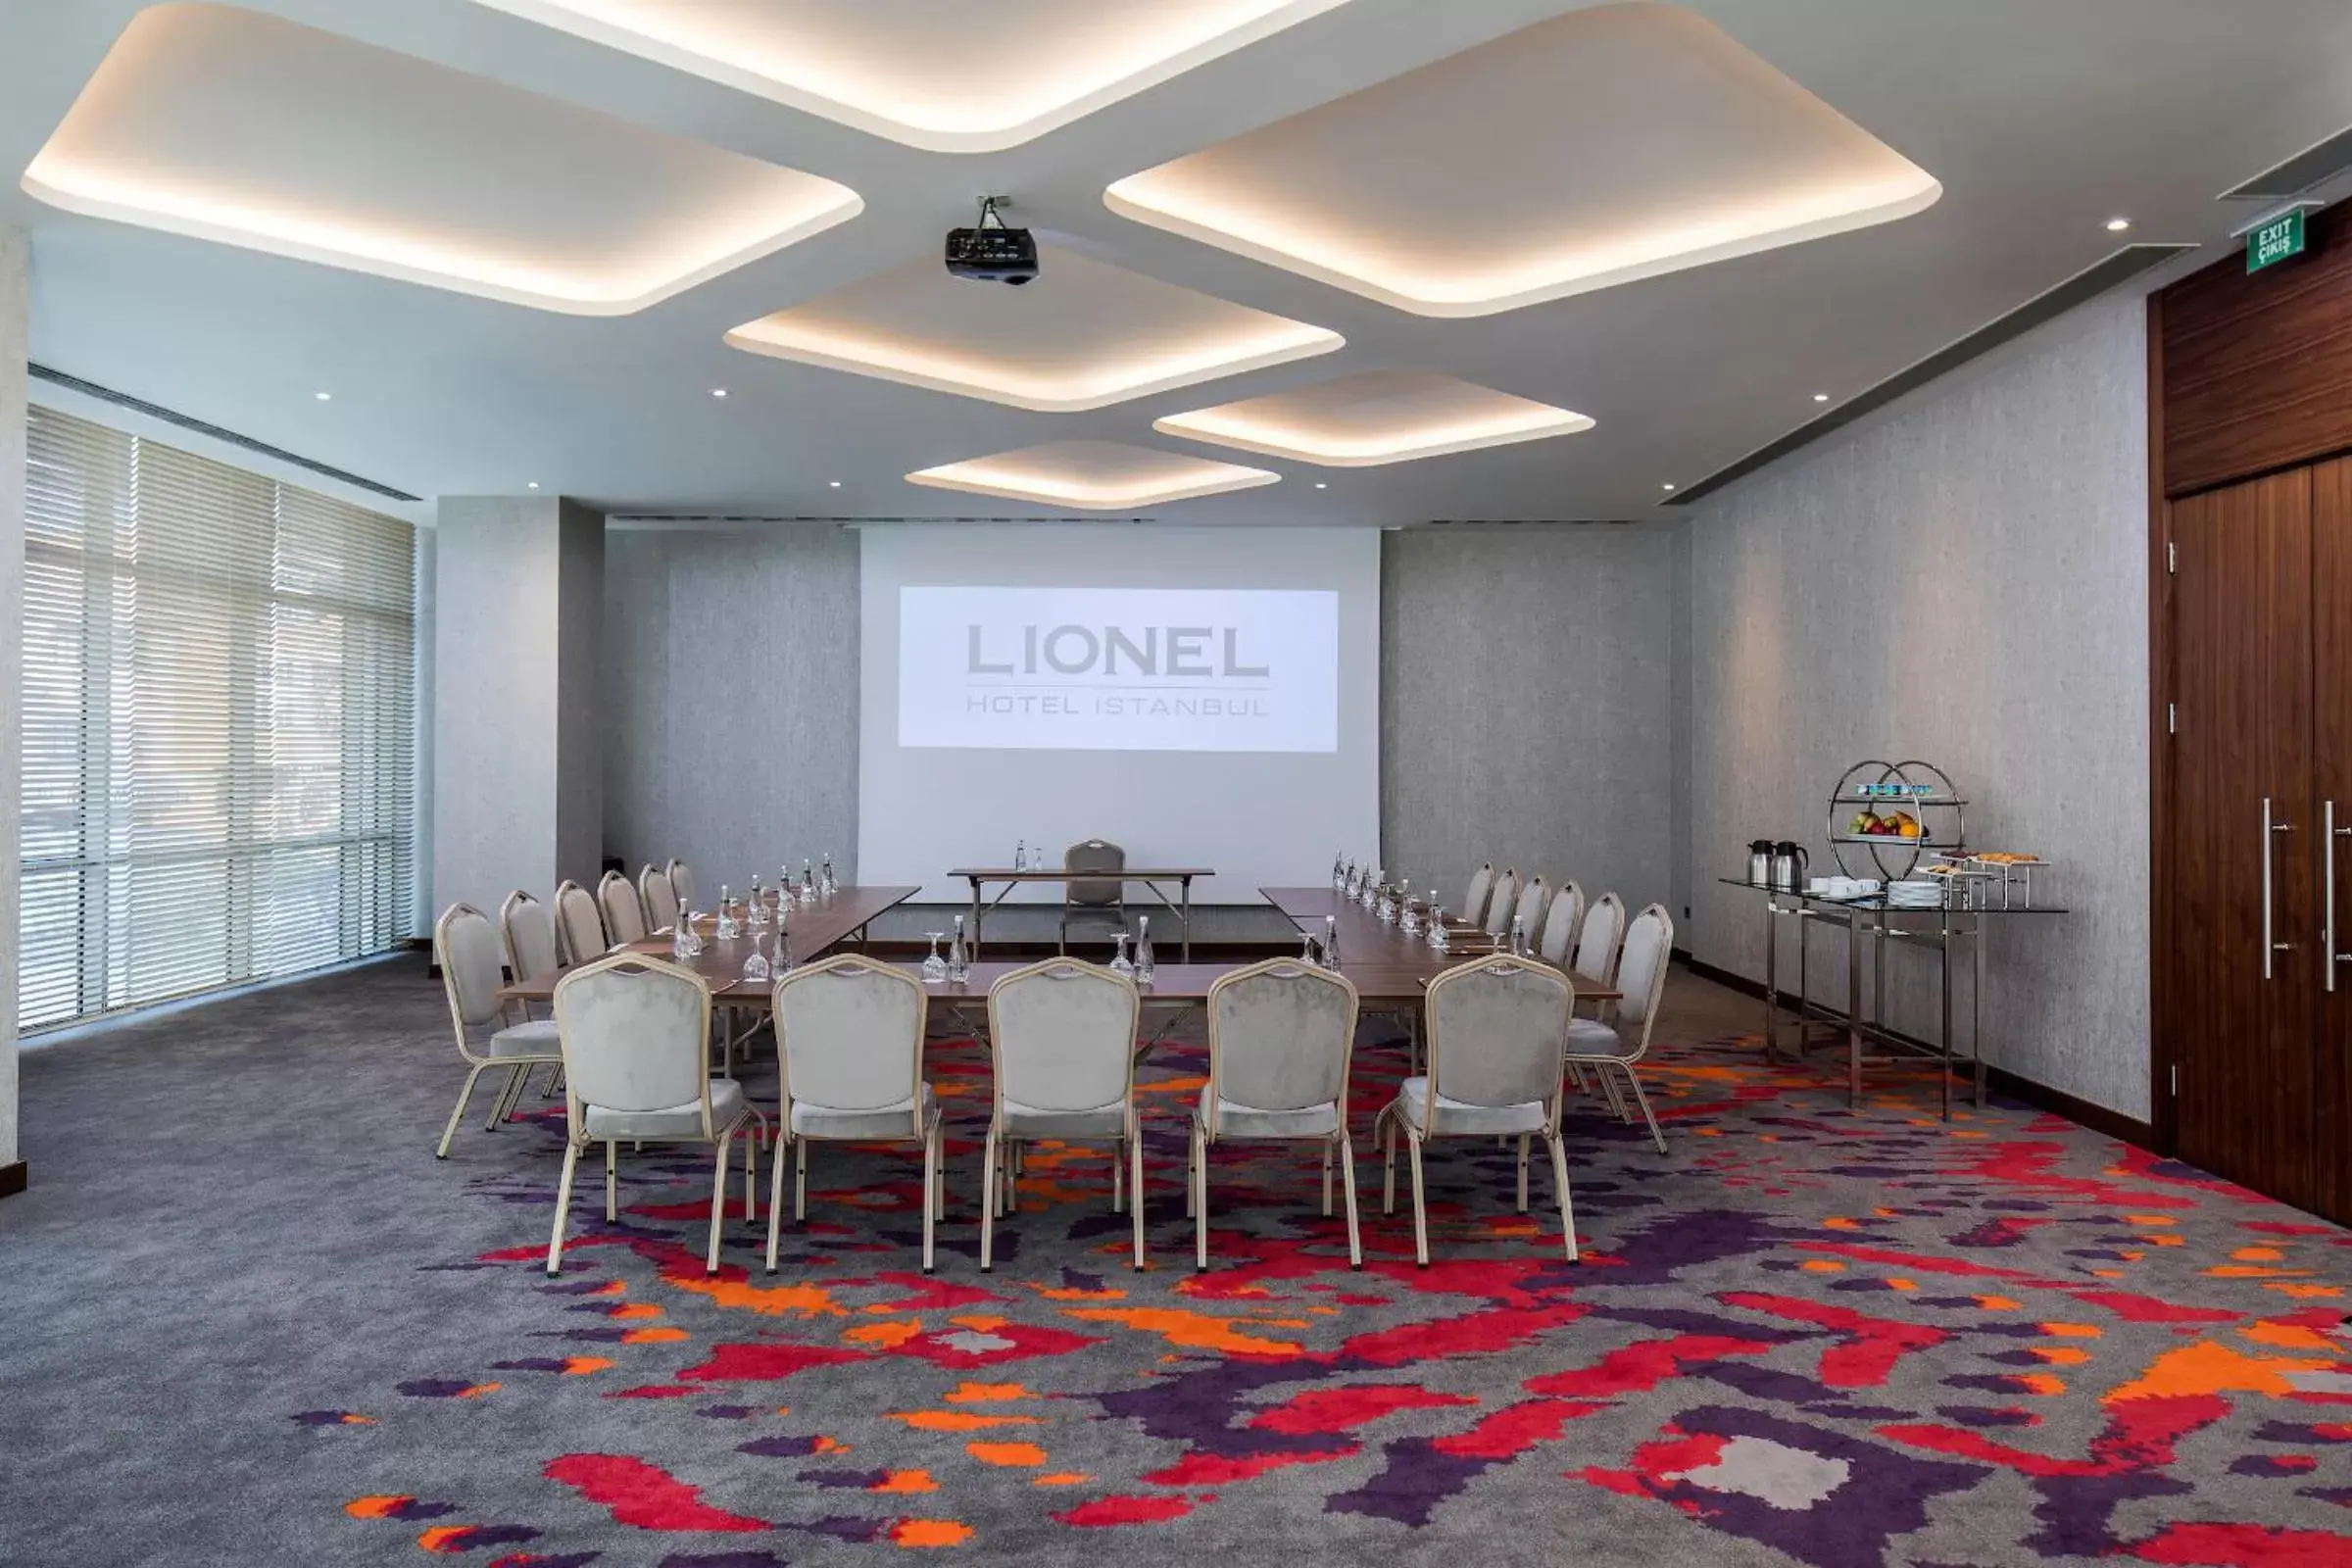 Area and facilities in Lionel Hotel Istanbul